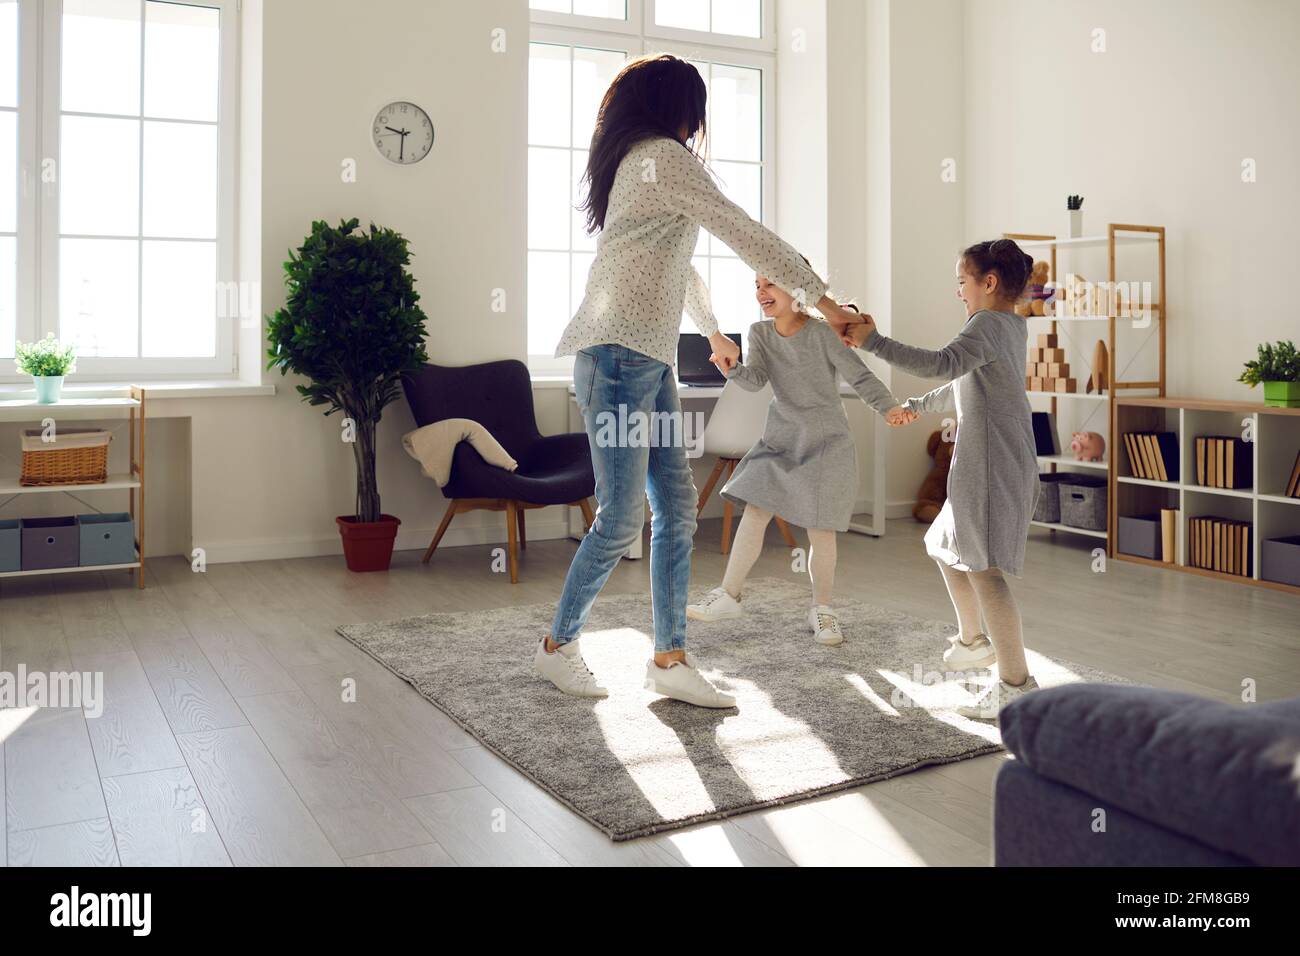 Funny active mother dancing together with daughters children in home living room Stock Photo